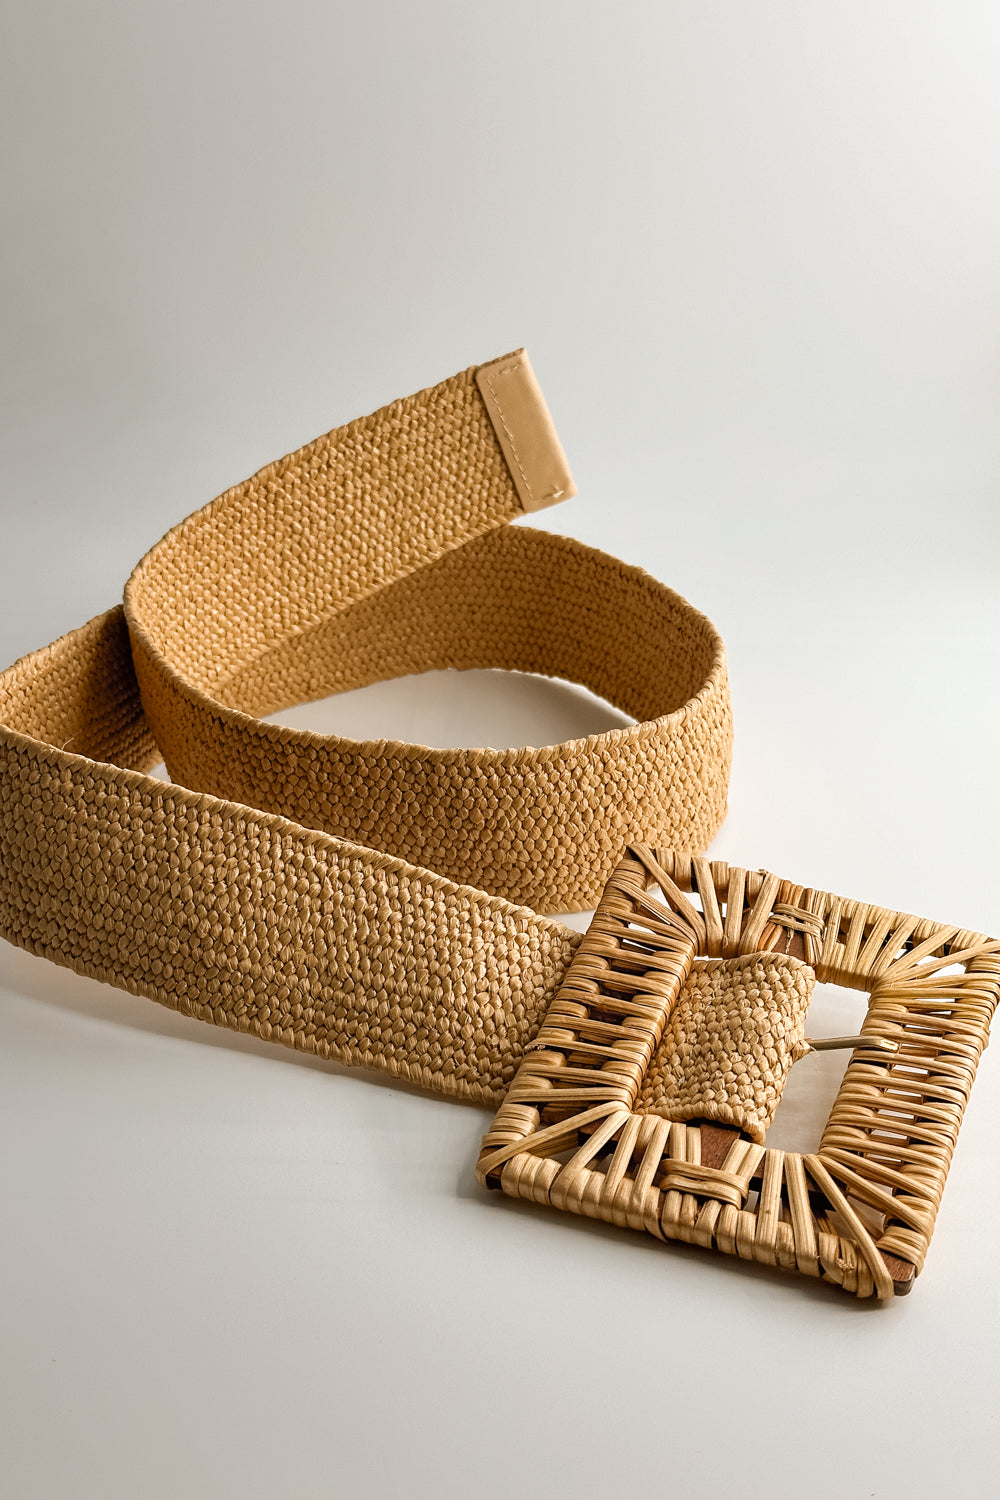 Flat lay view of the Savannah Tan Rattan Square Adjustable Belt which features tan rattan fabric, square rattan adjustable buckle